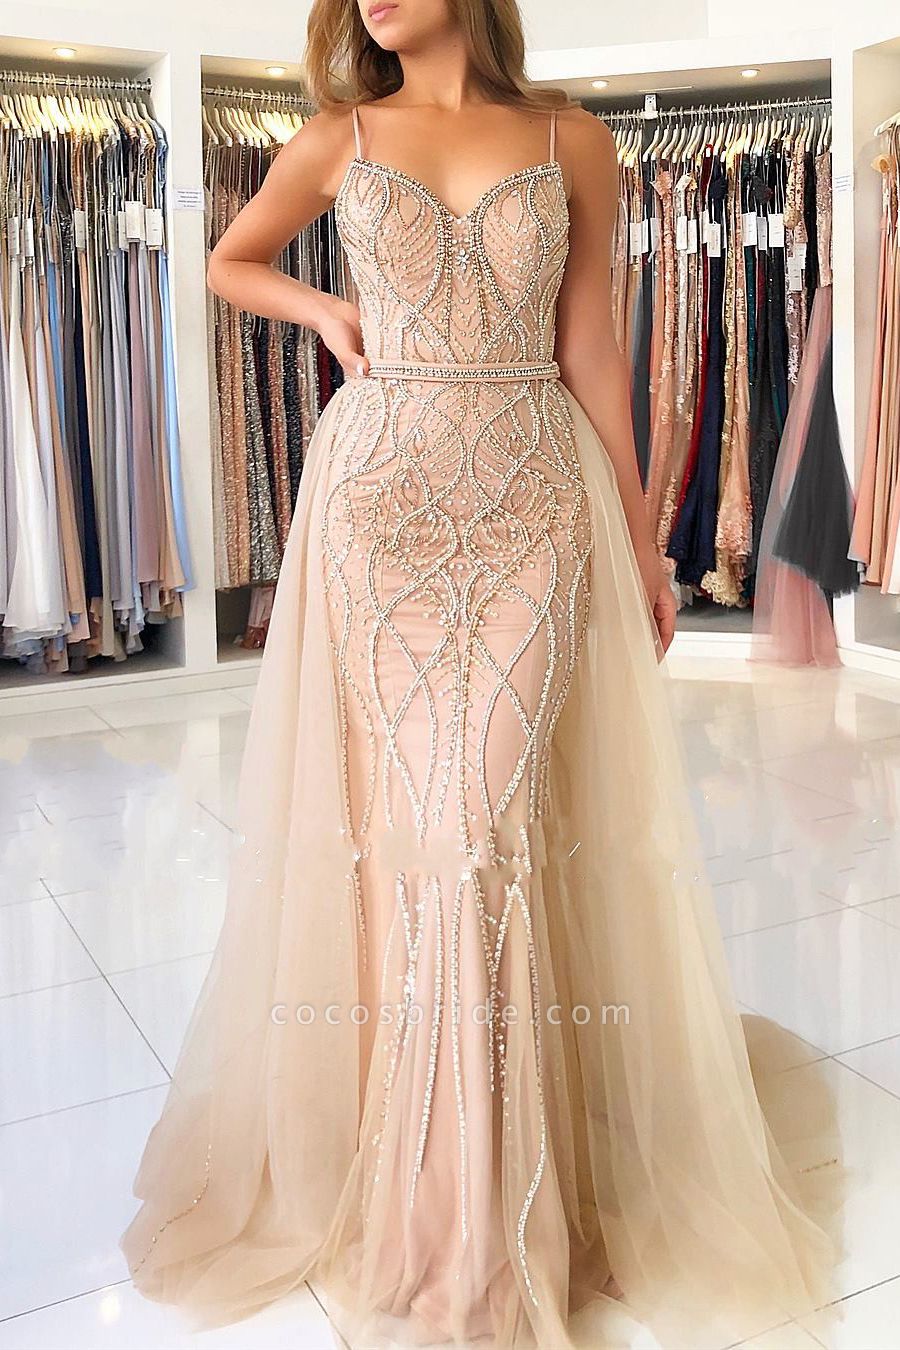 Spaghetti Straps Sweetheart Beading Mermaid Prom Dress With Tulle Train